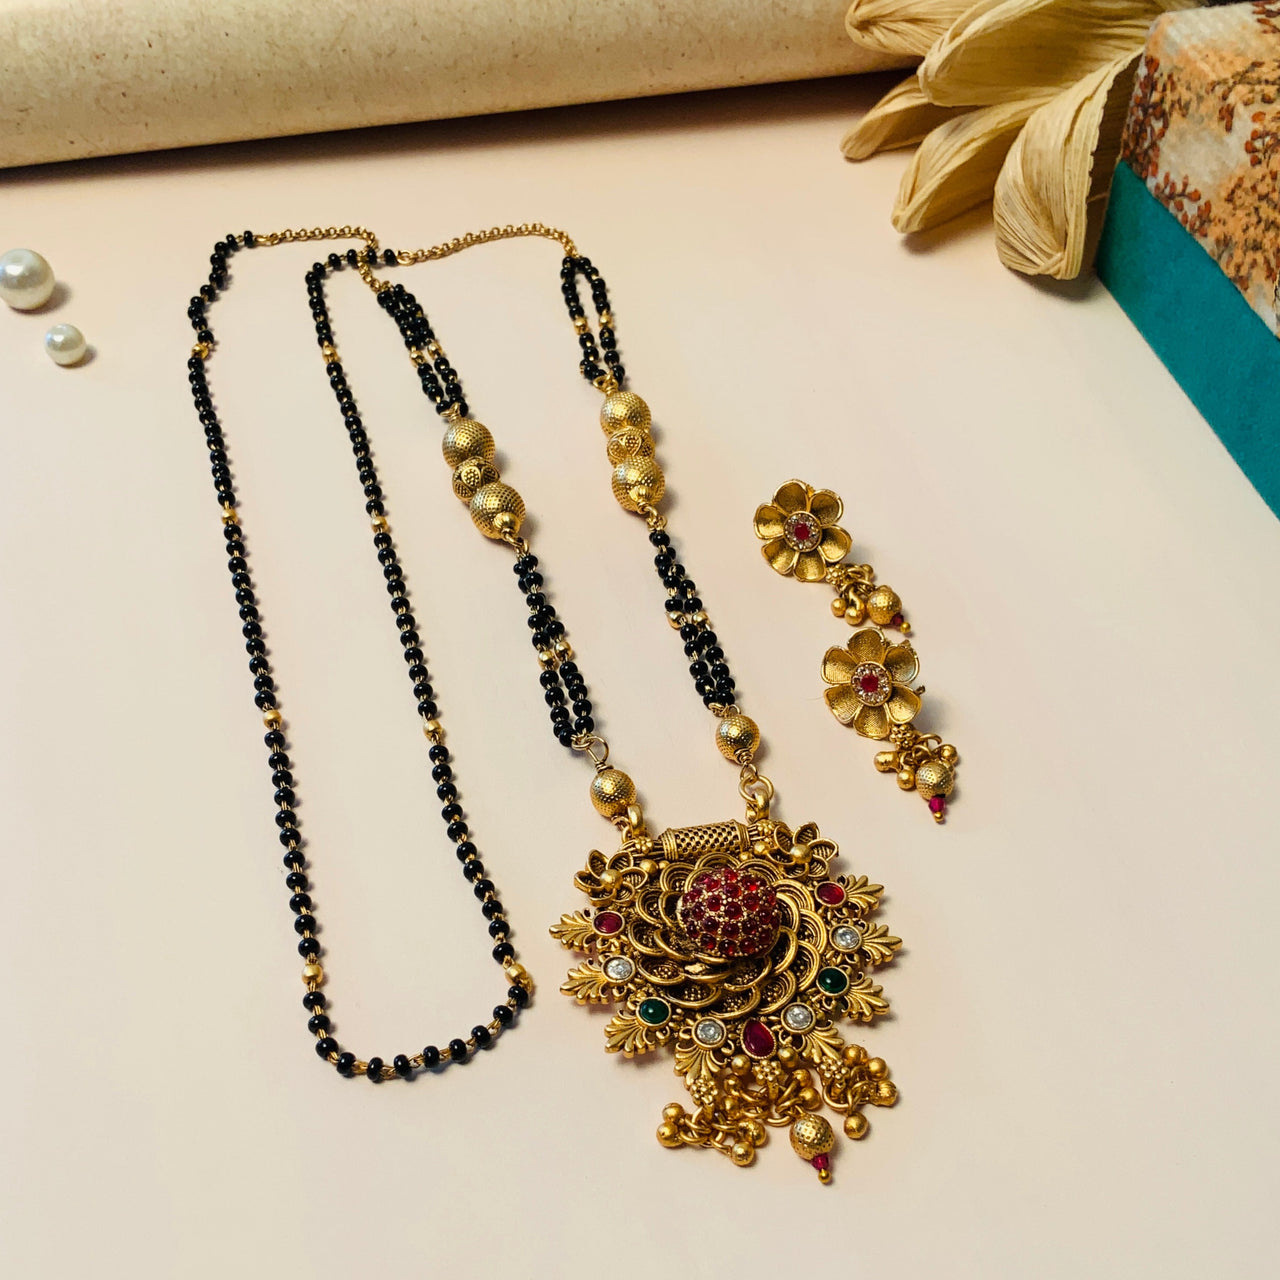 Finely-crafted Antique Long Mangalsutra